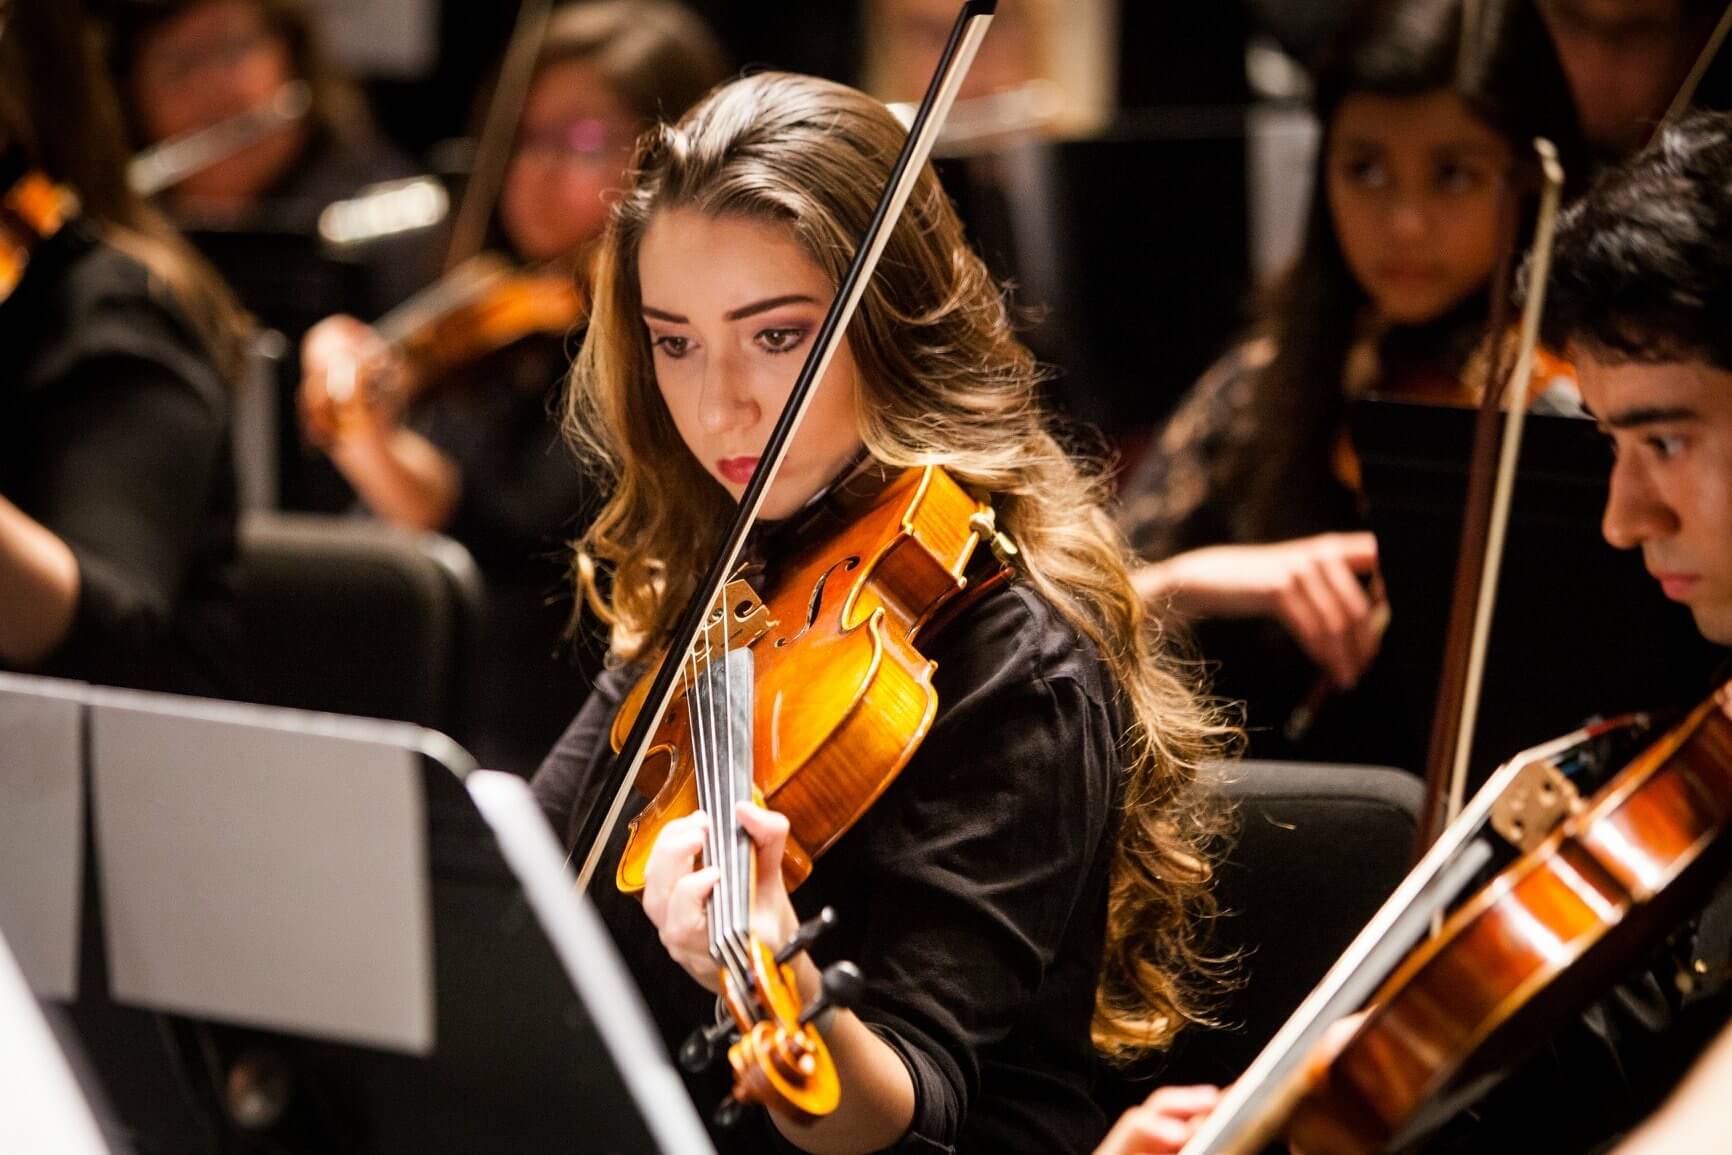 Seren Ozoglu playing the viola as part of the UCF orchestra